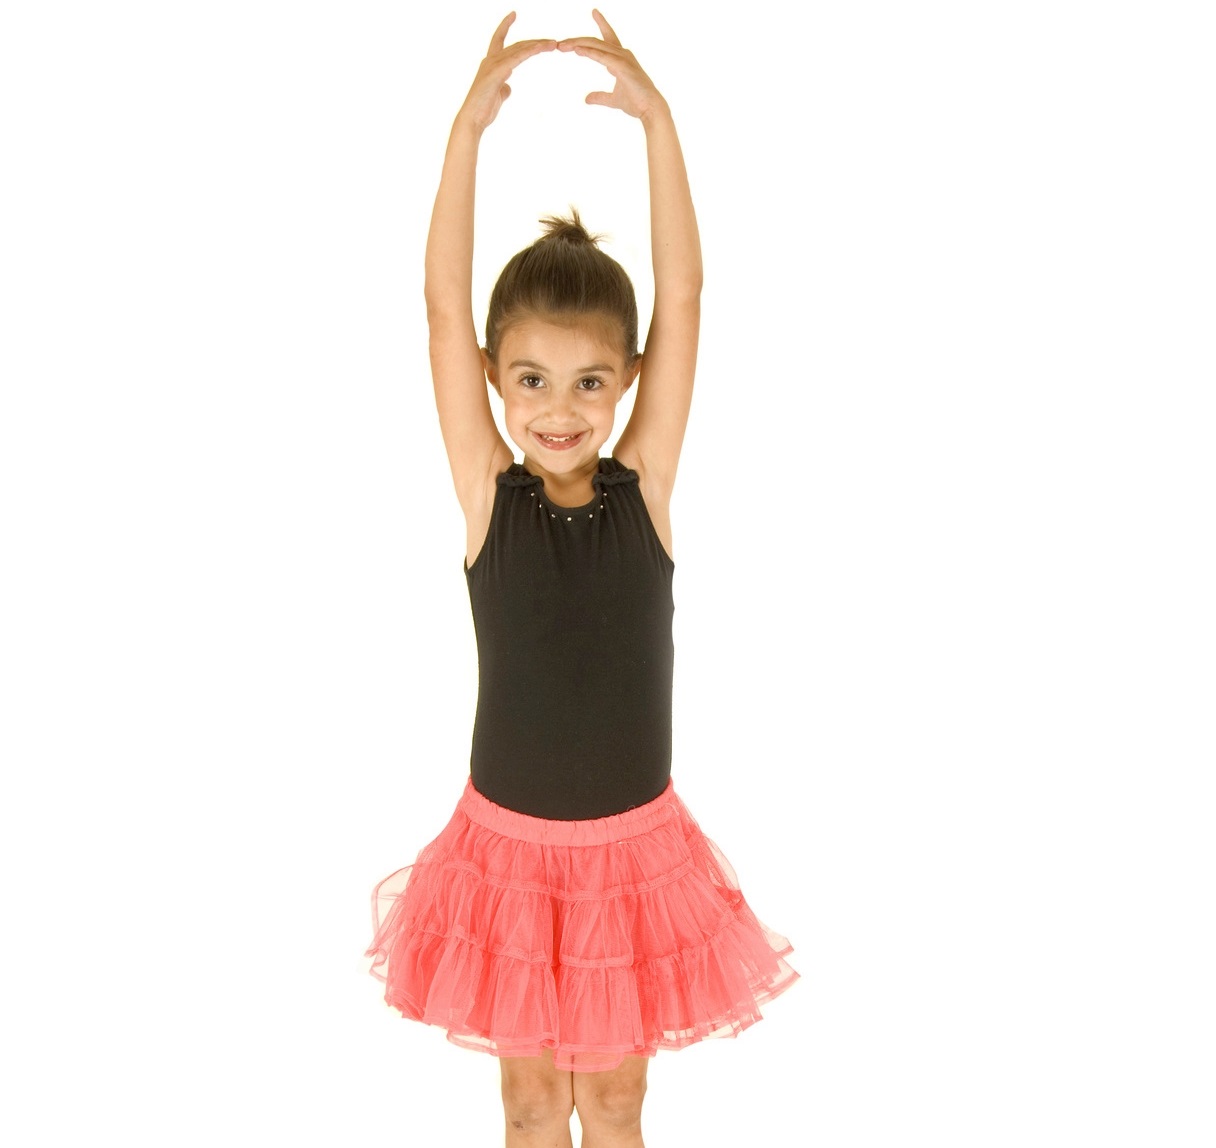 cute young ballerina girl posing with her arms in the air